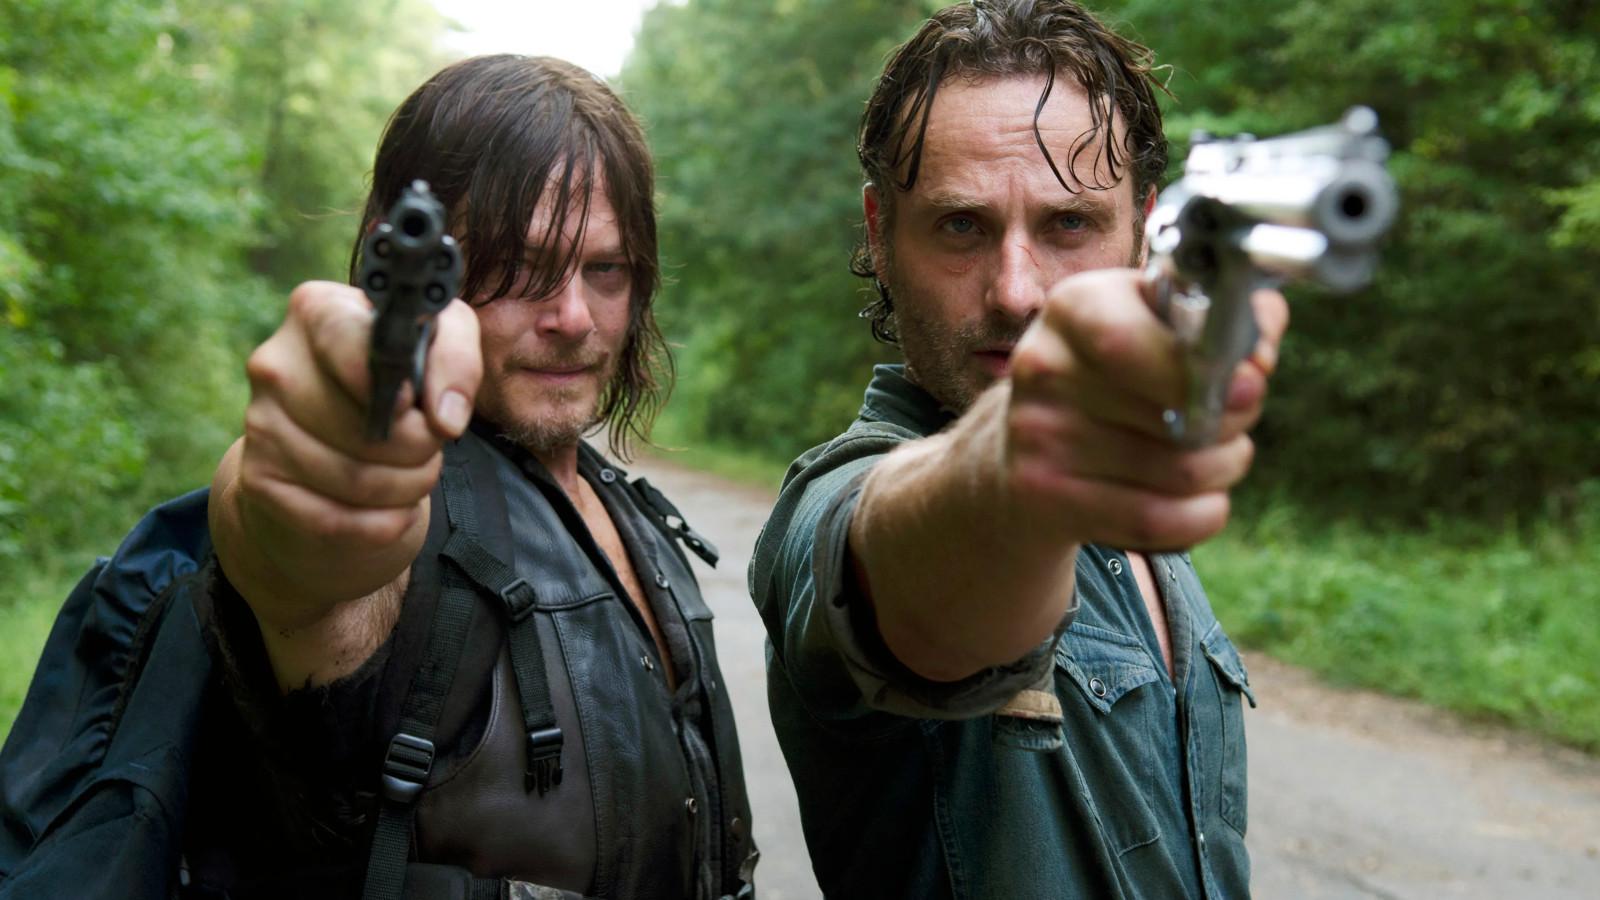 Norman Reedus as Daryl and Andrew Lincoln as Rick in The Walking Dead